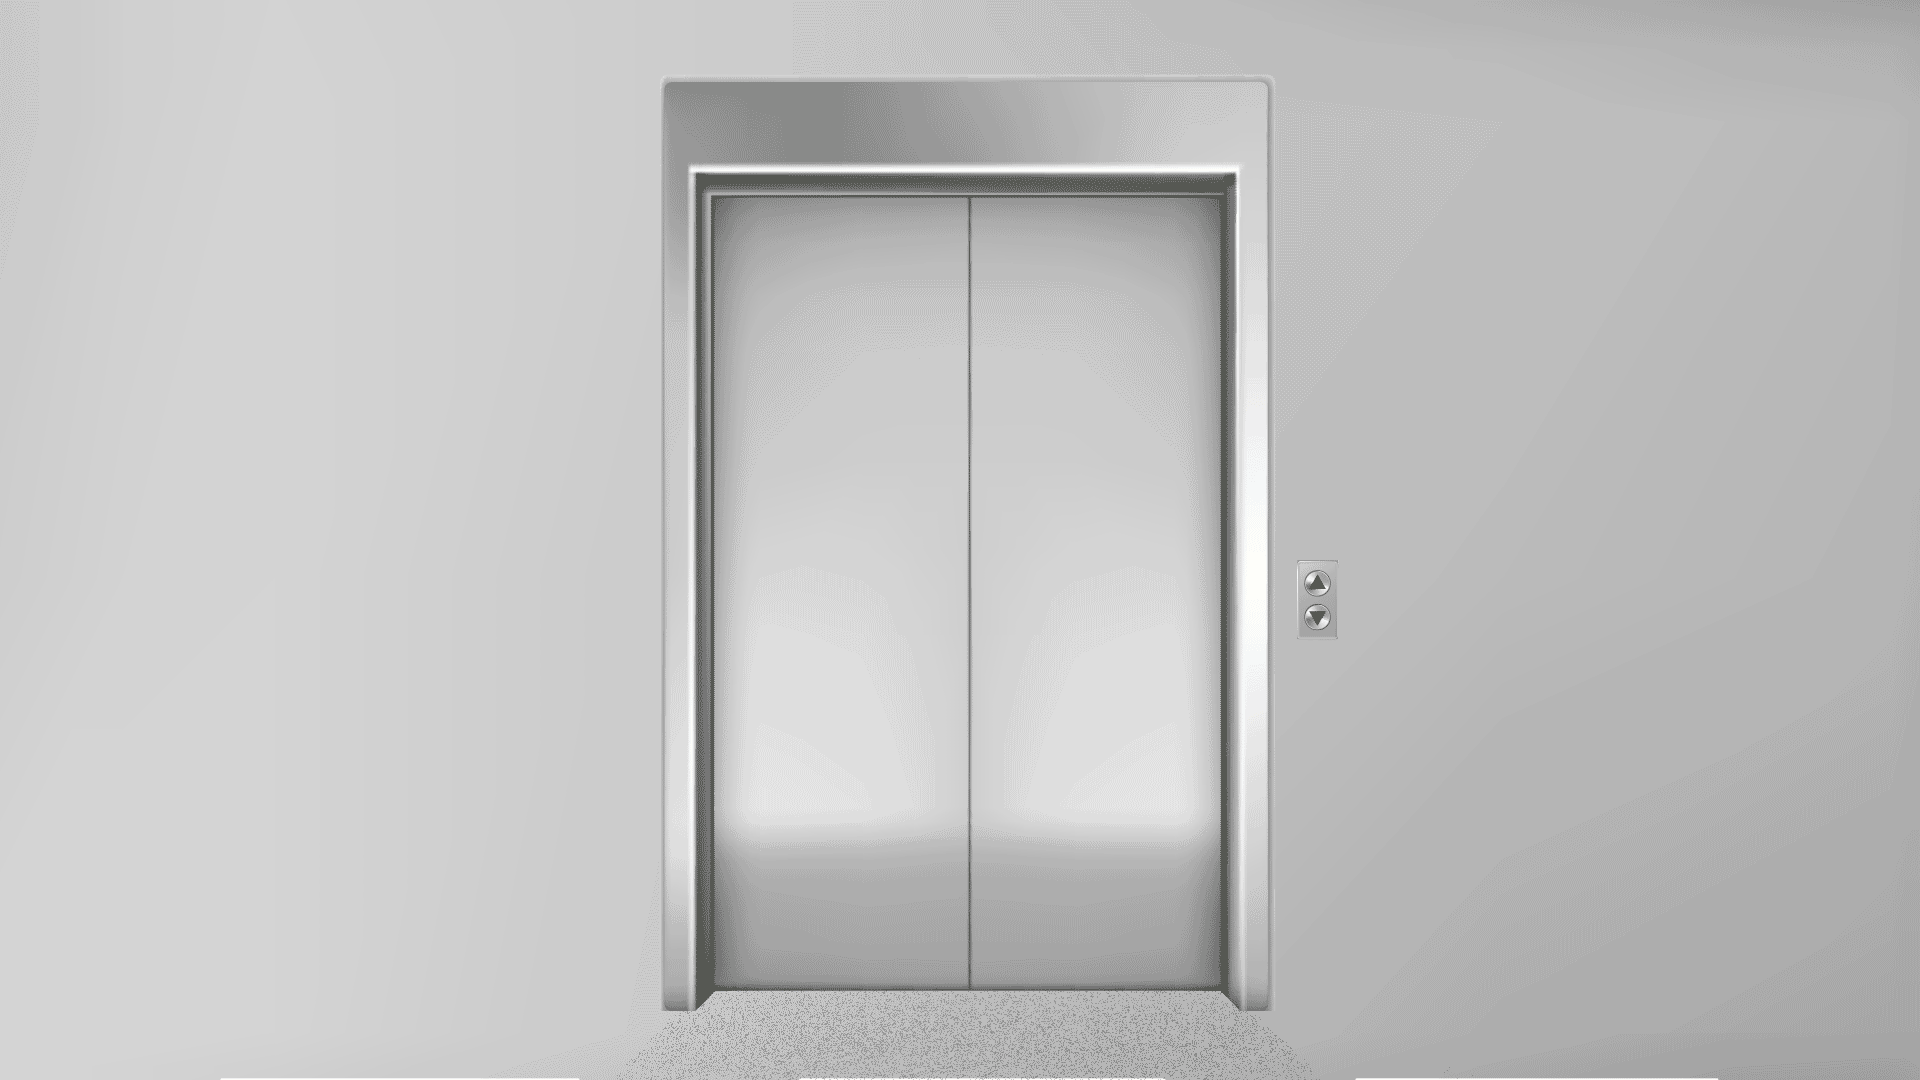 Gif of a elevator full of money opening and closing